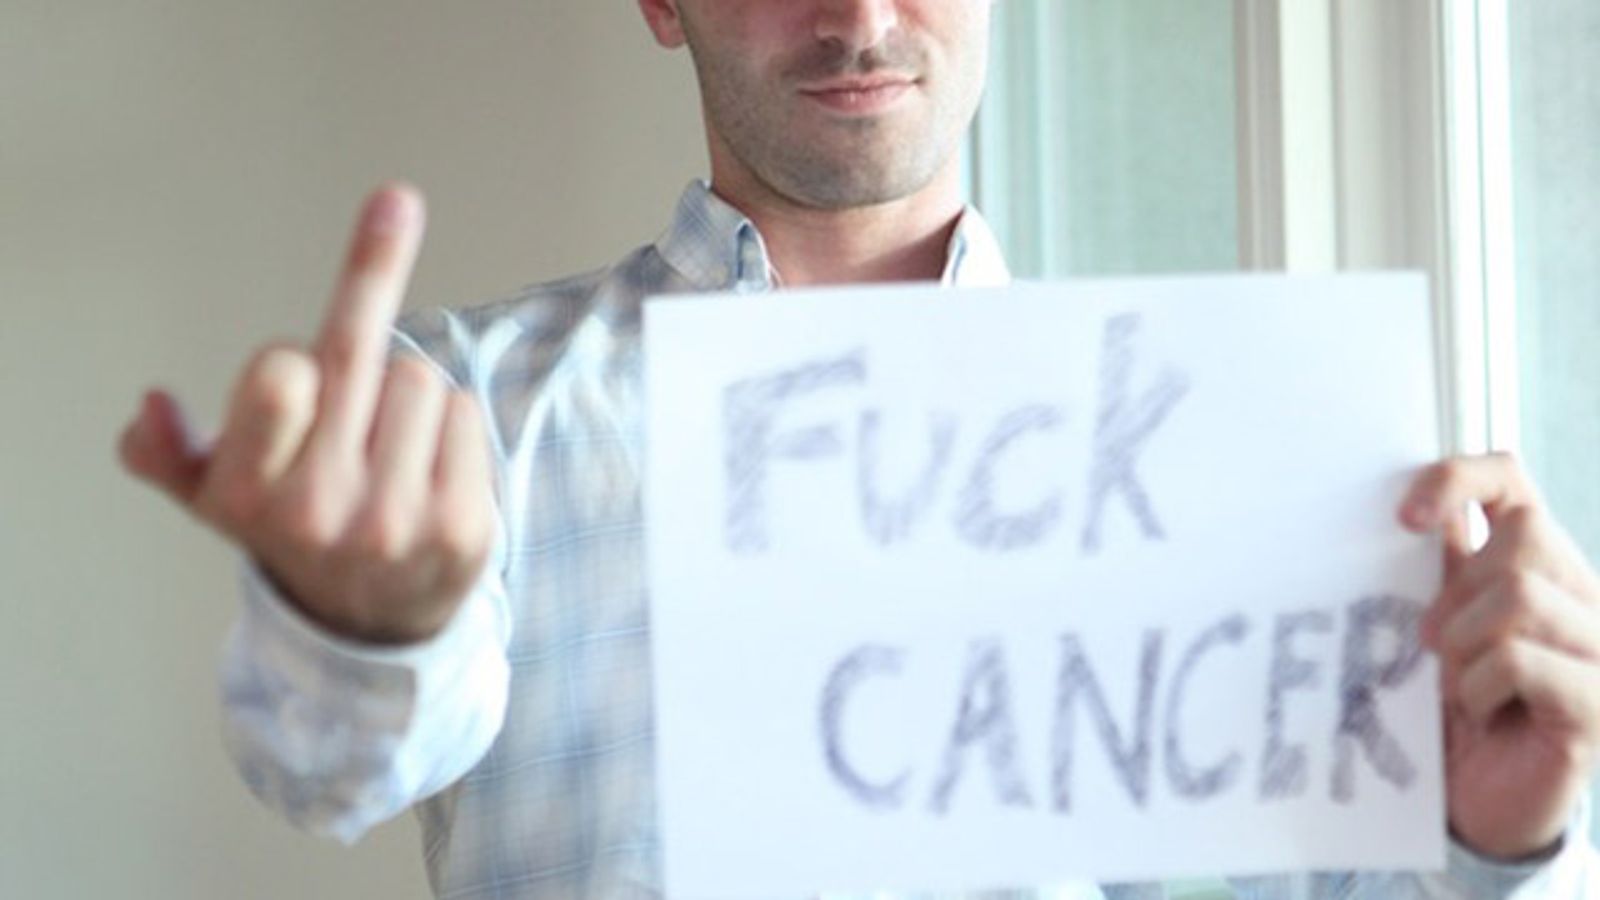 James Deen’s Breast Cancer Awareness Campaign Nets Over $5K